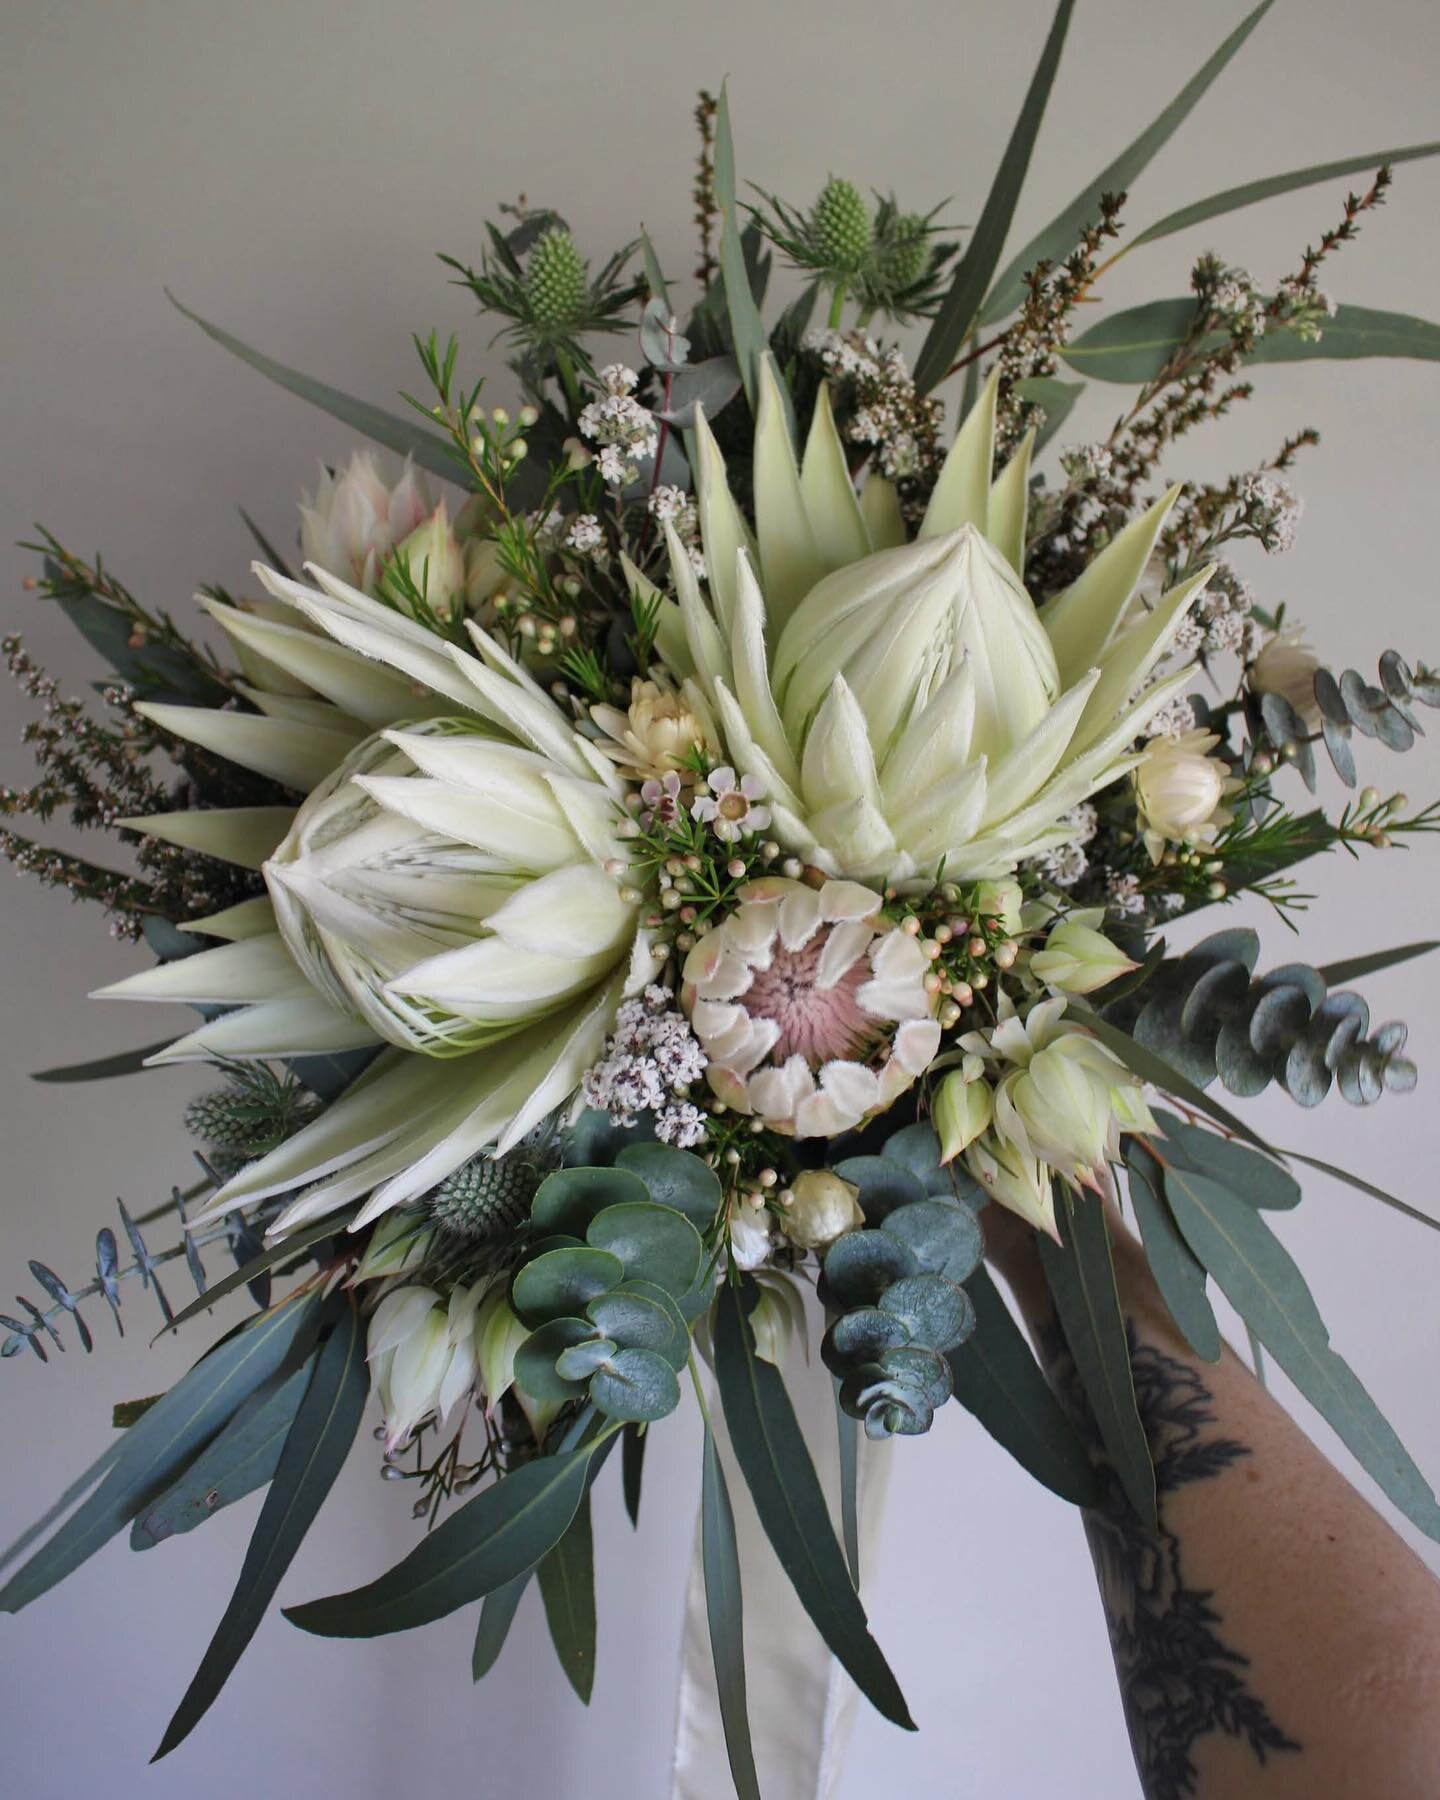 Beautiful white king proteas for Lauren ✨
An ode to her South African heritage. I had the absolute pleasure of attending and celebrating Lauren &amp; Sean&rsquo;s special day on Sunday 🫶
Thank you both for trusting me with your wedding flowers and h